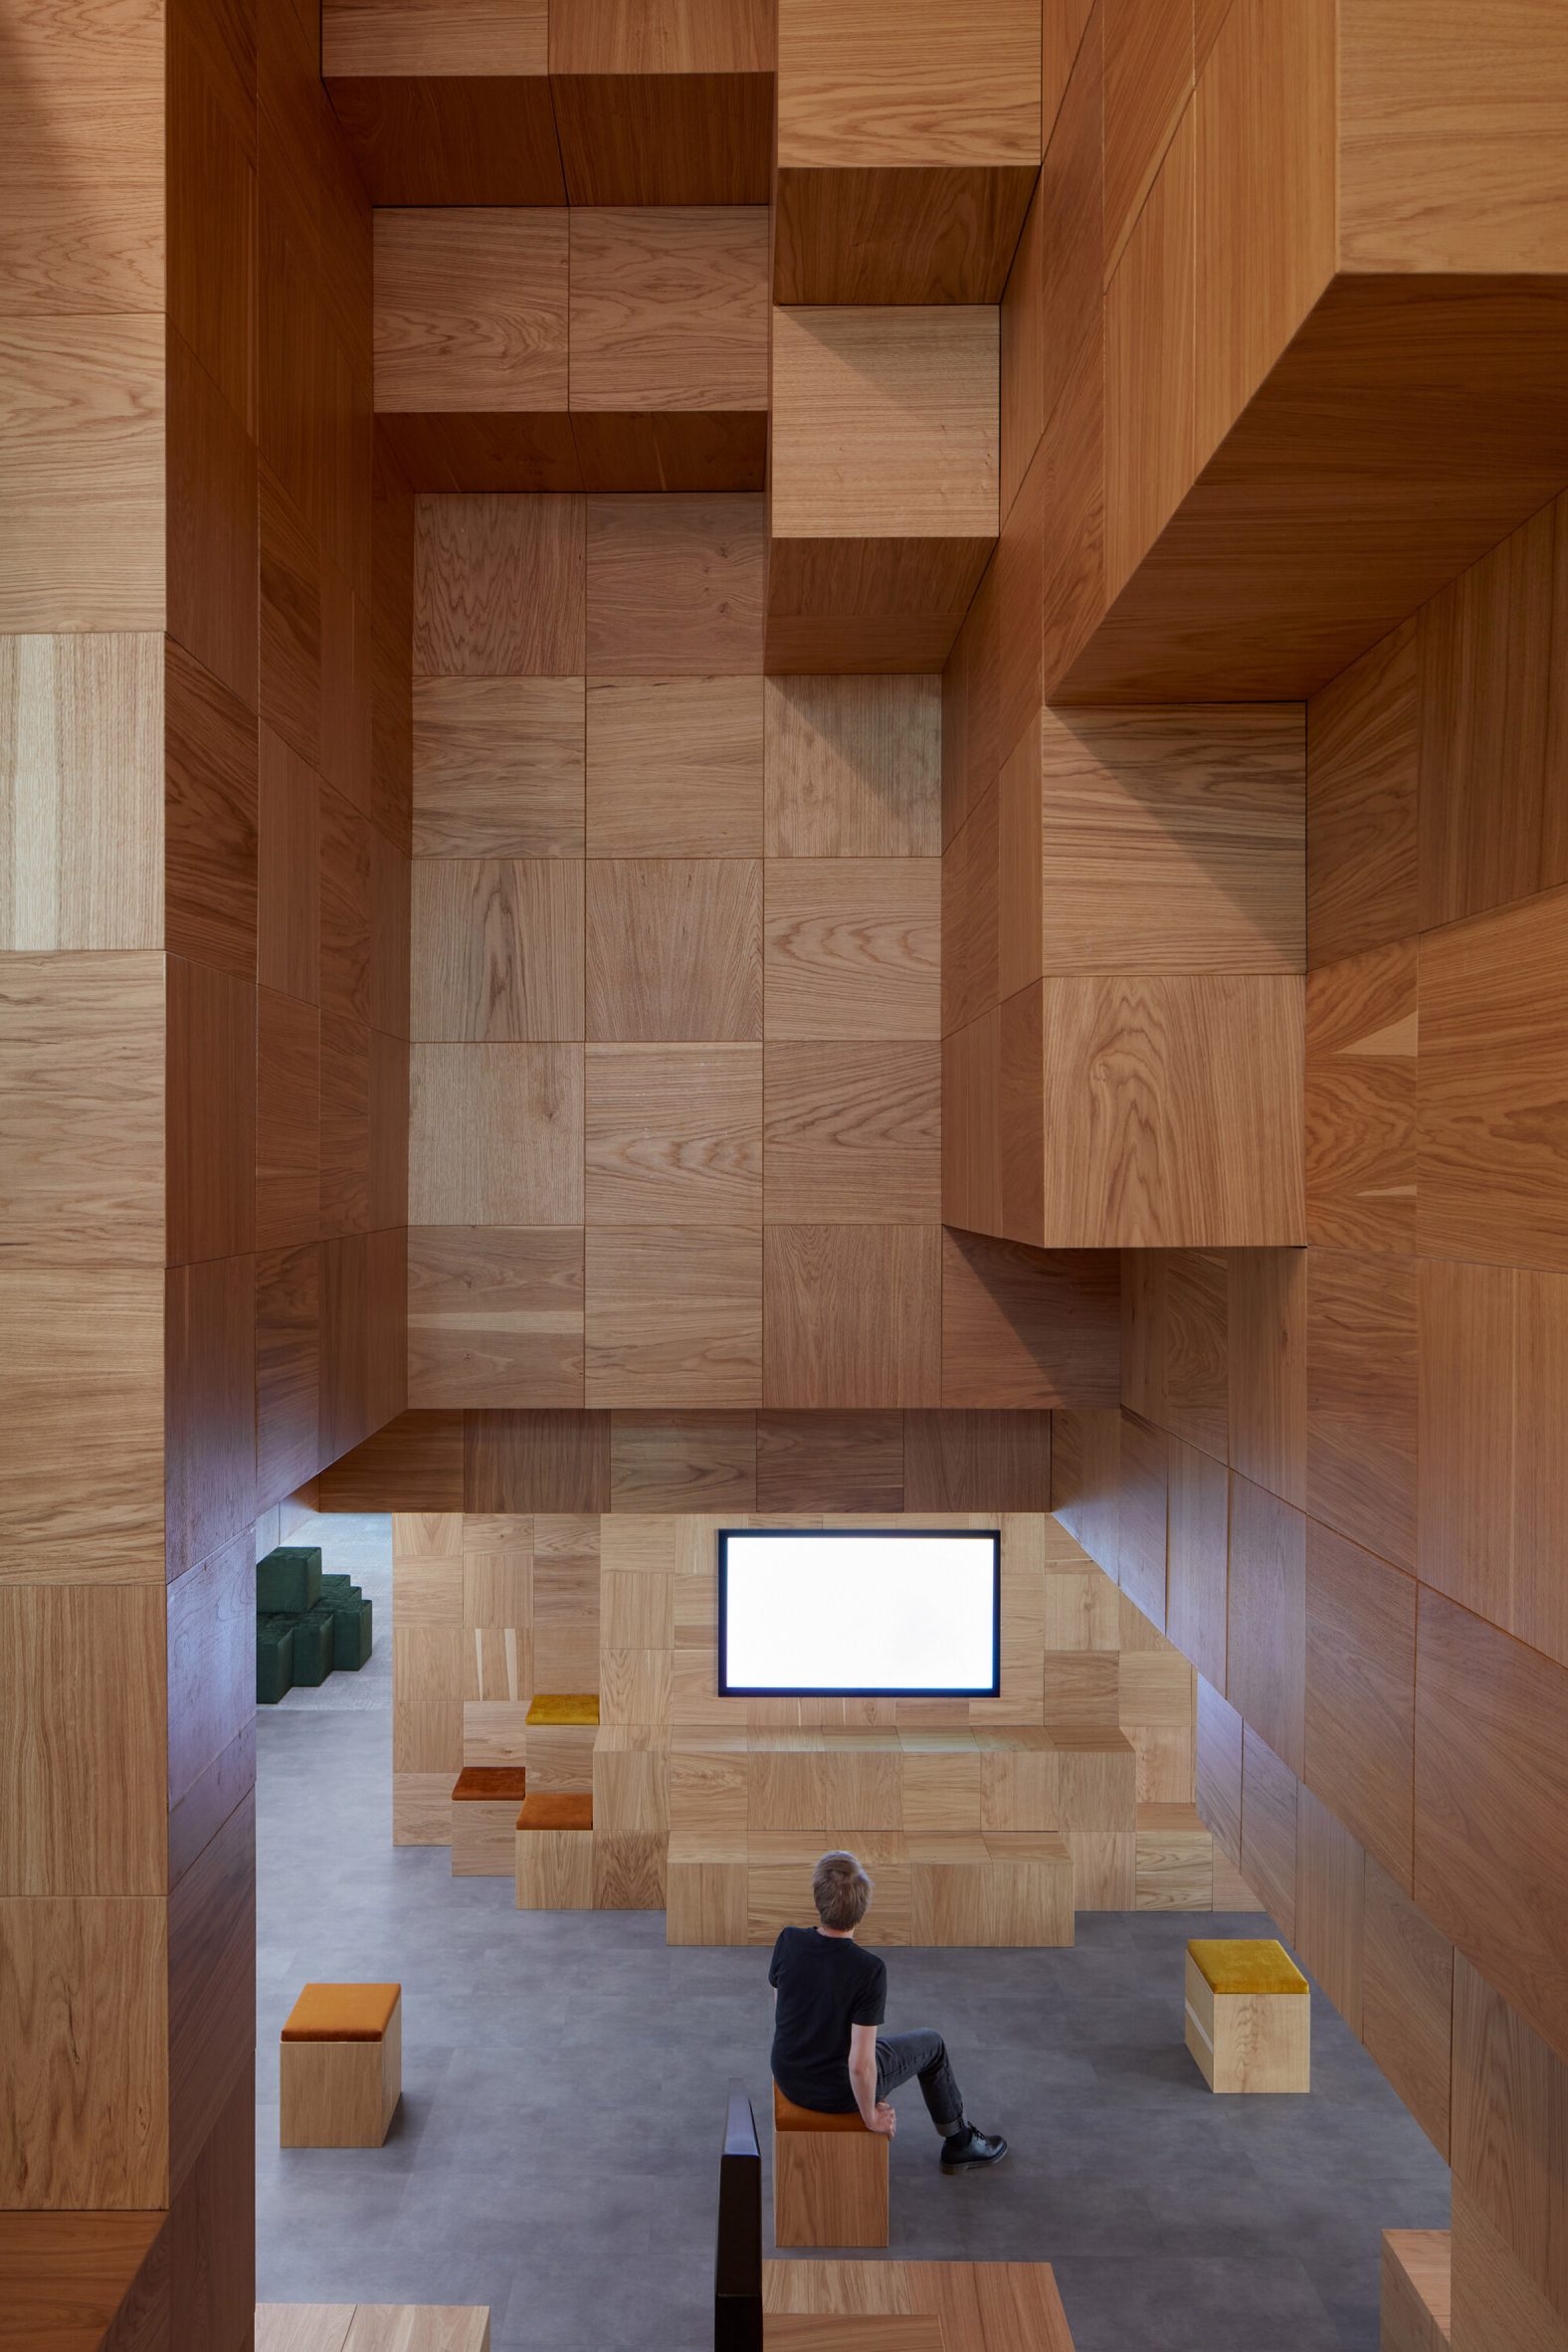 Pixelated wood interiors in Pricefx office by Collcoll in Prague